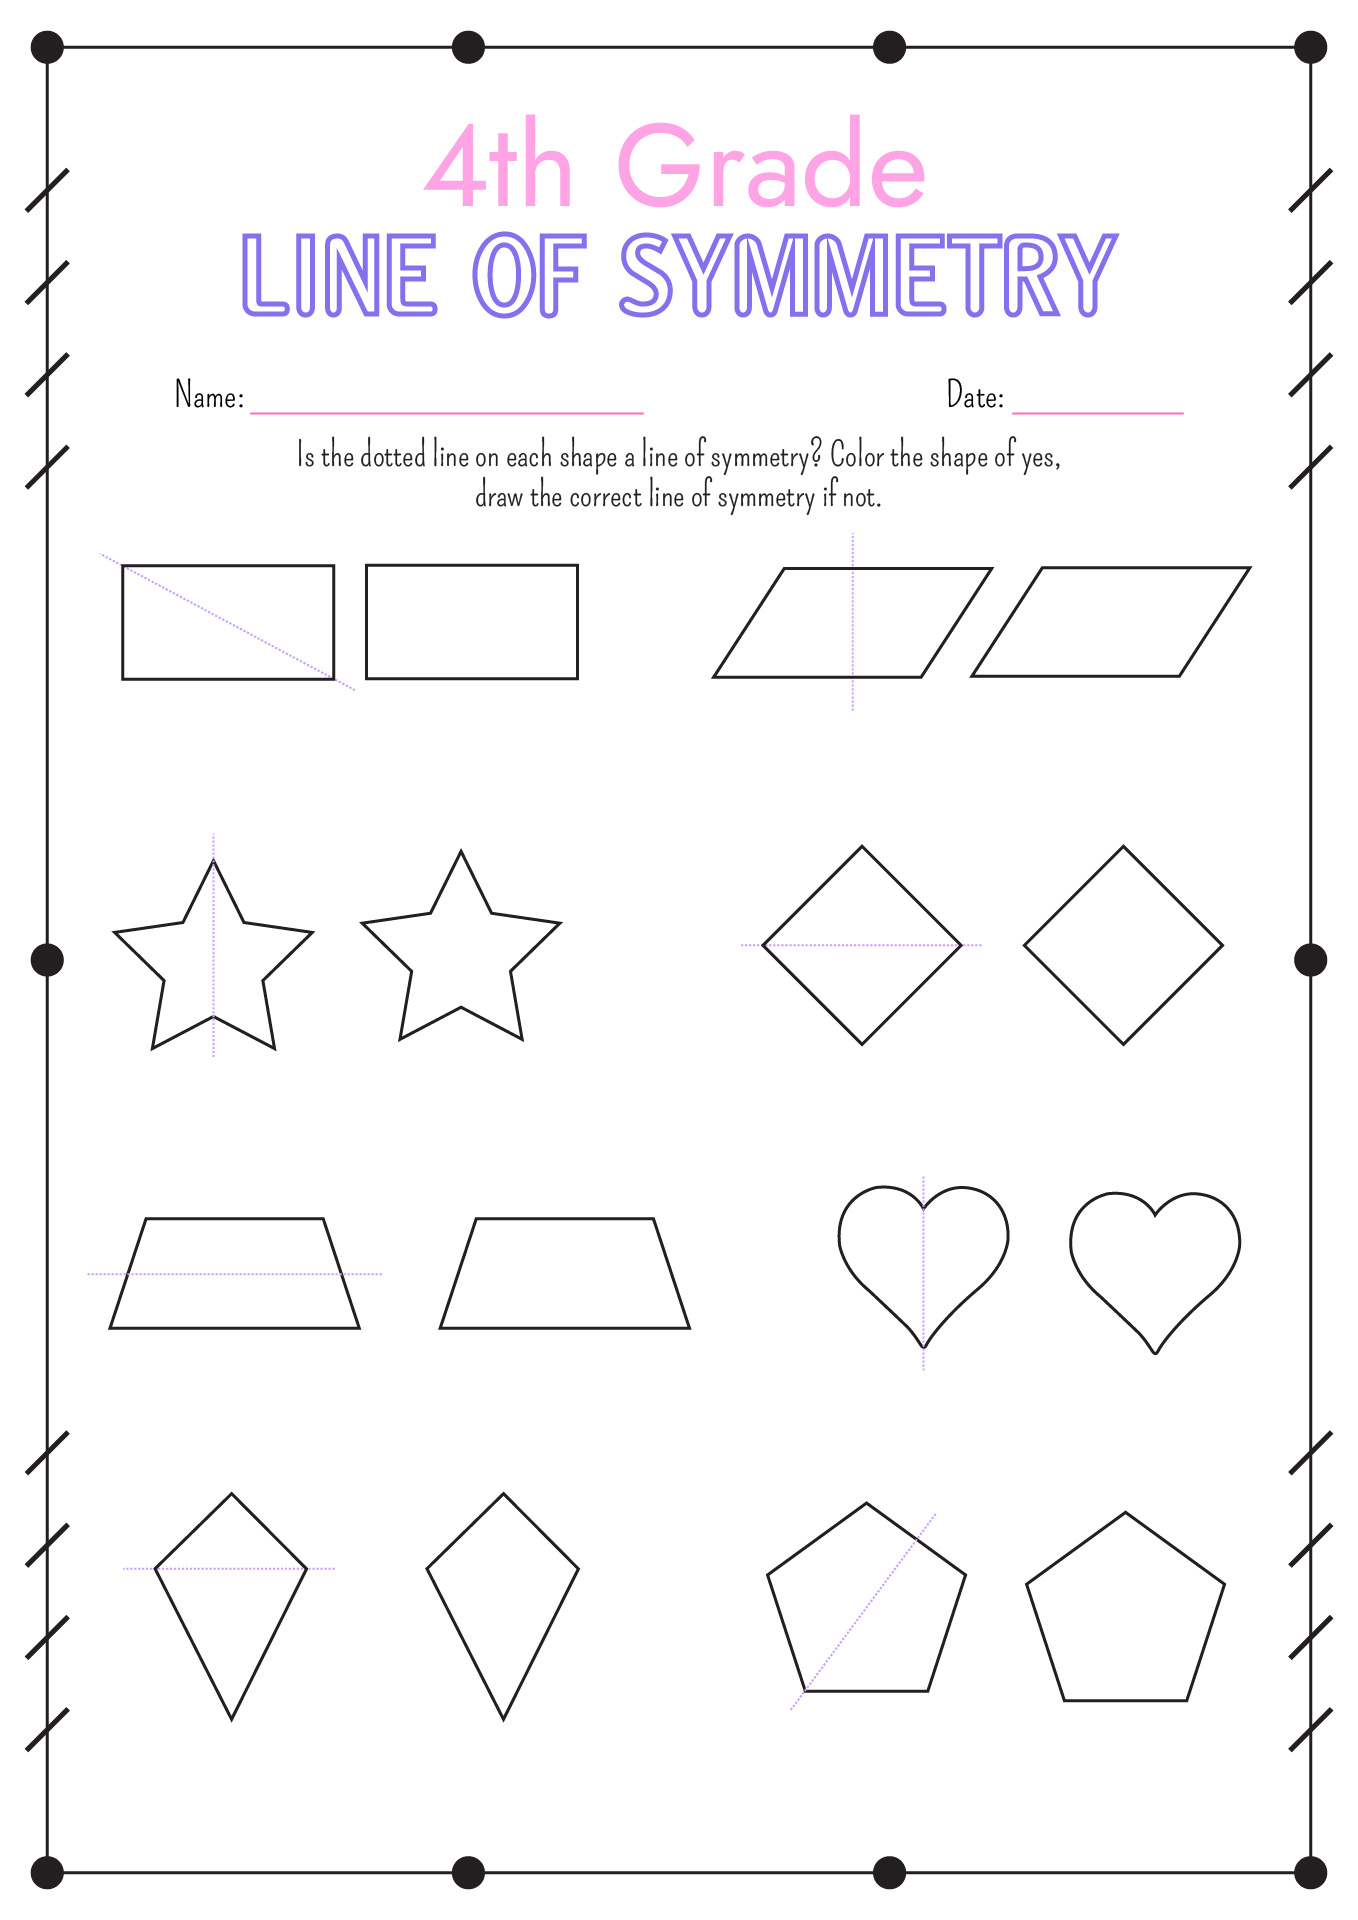 Lines of Symmetry Worksheets 4th Grade